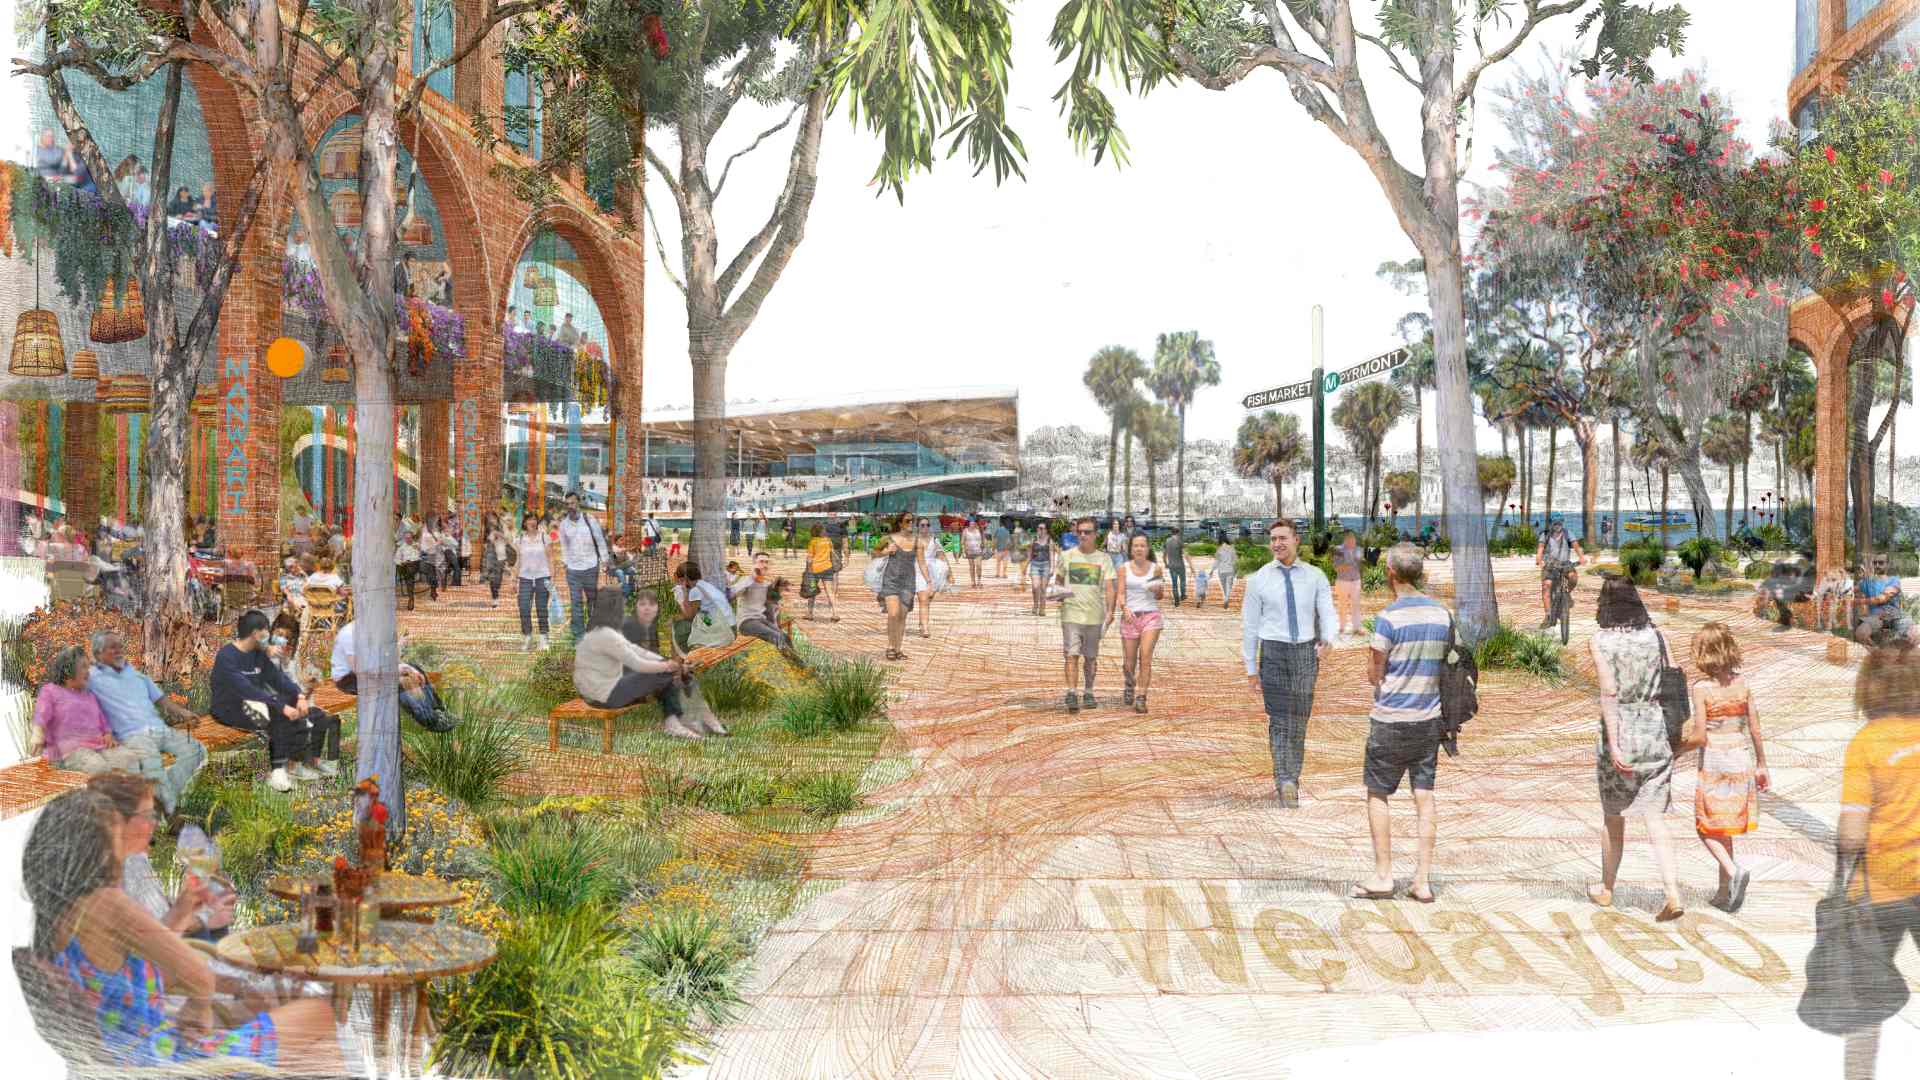 Plans for the Soon-to-be-Former Sydney Fish Market Site Have Been Unveiled